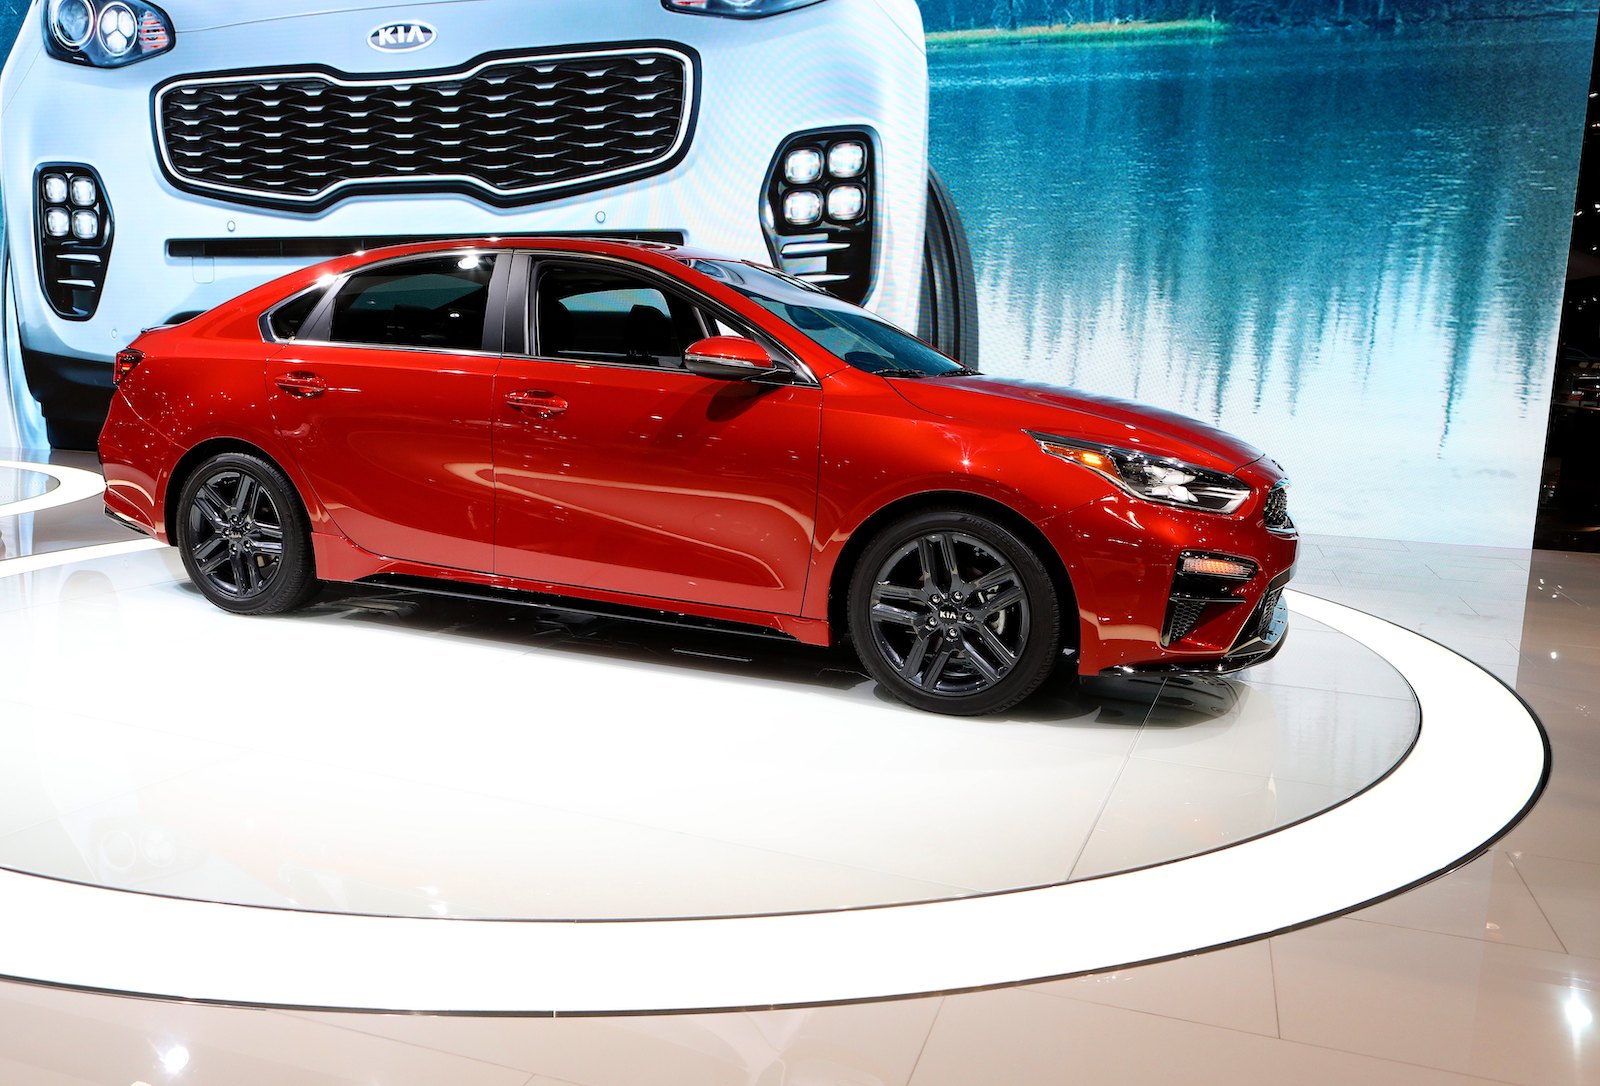 2019 Kia Forte EX Launch Edition is on display at the 110th Annual Chicago Auto Show at McCormick Place